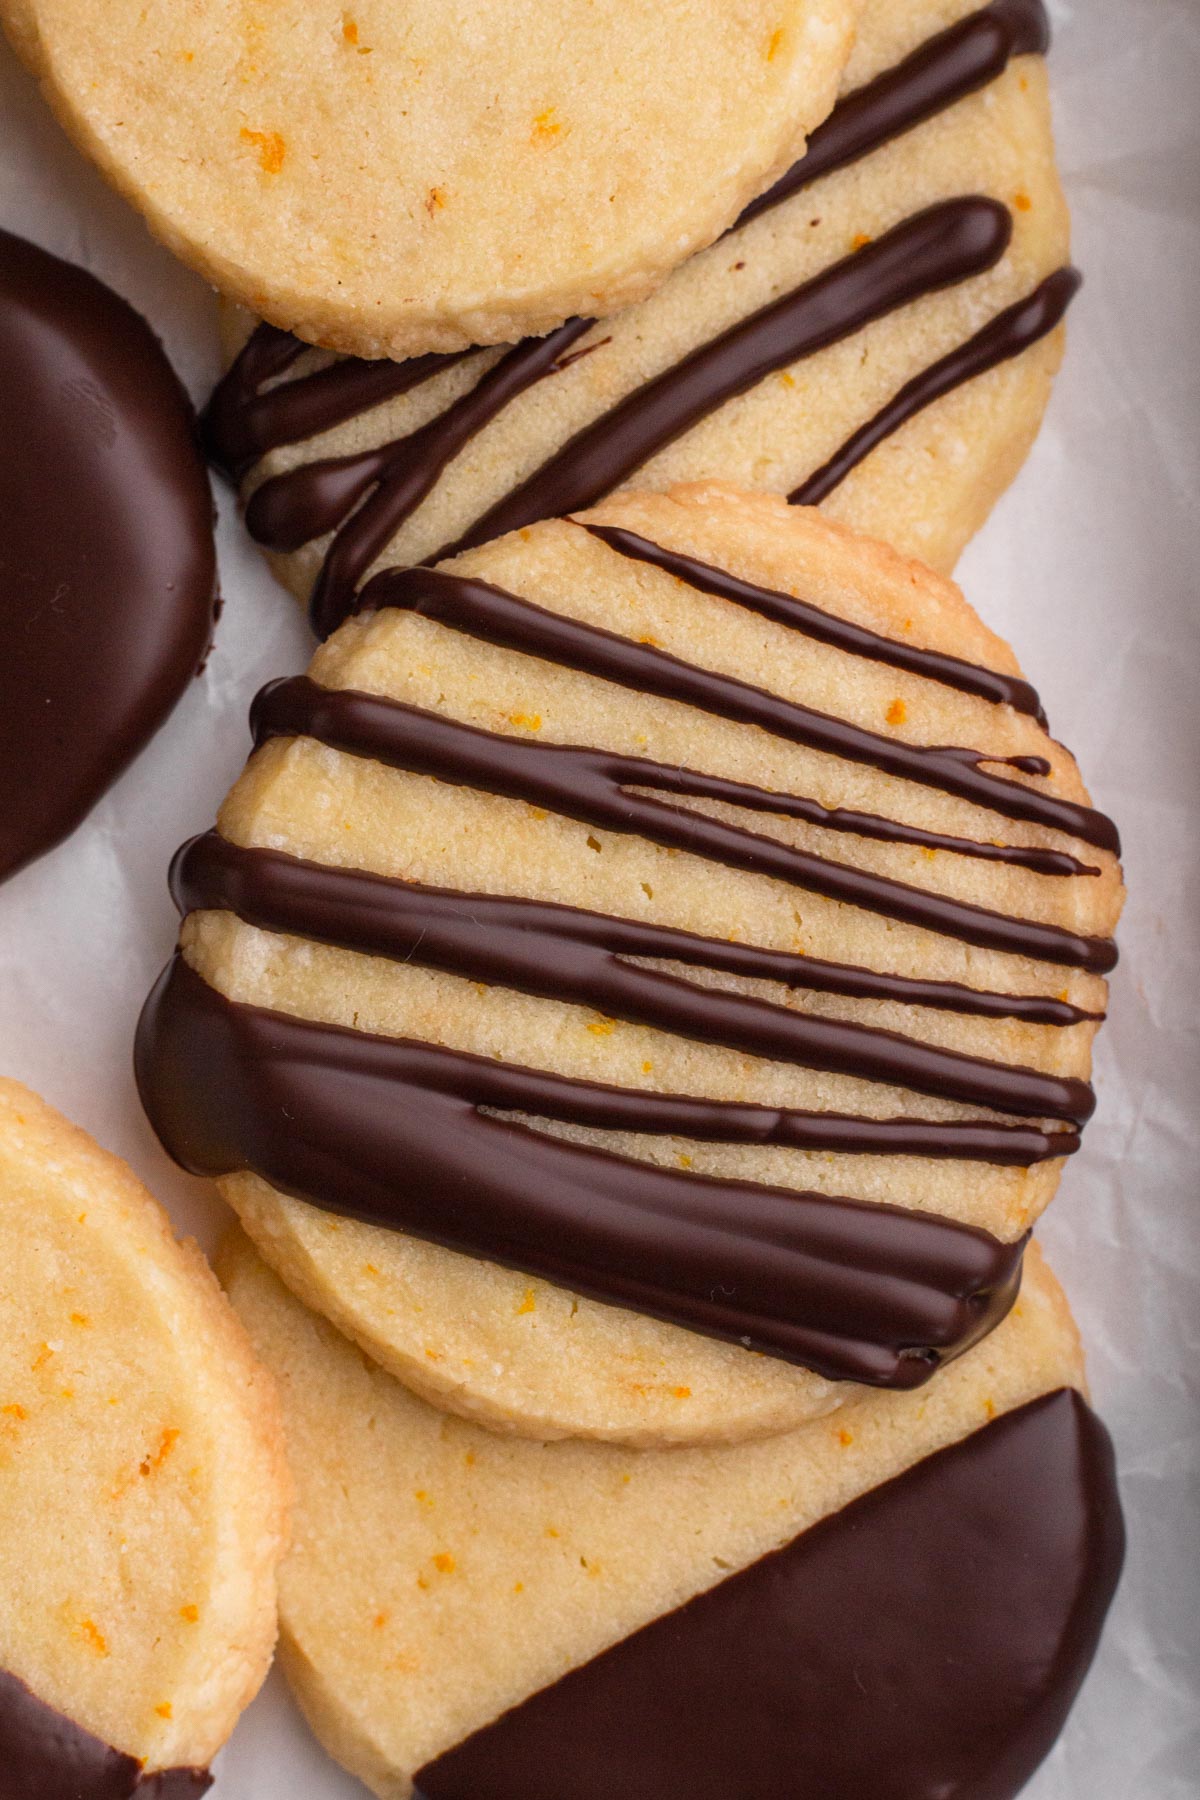 Overhead view of a chocolate-drizzled shortbread cookie.